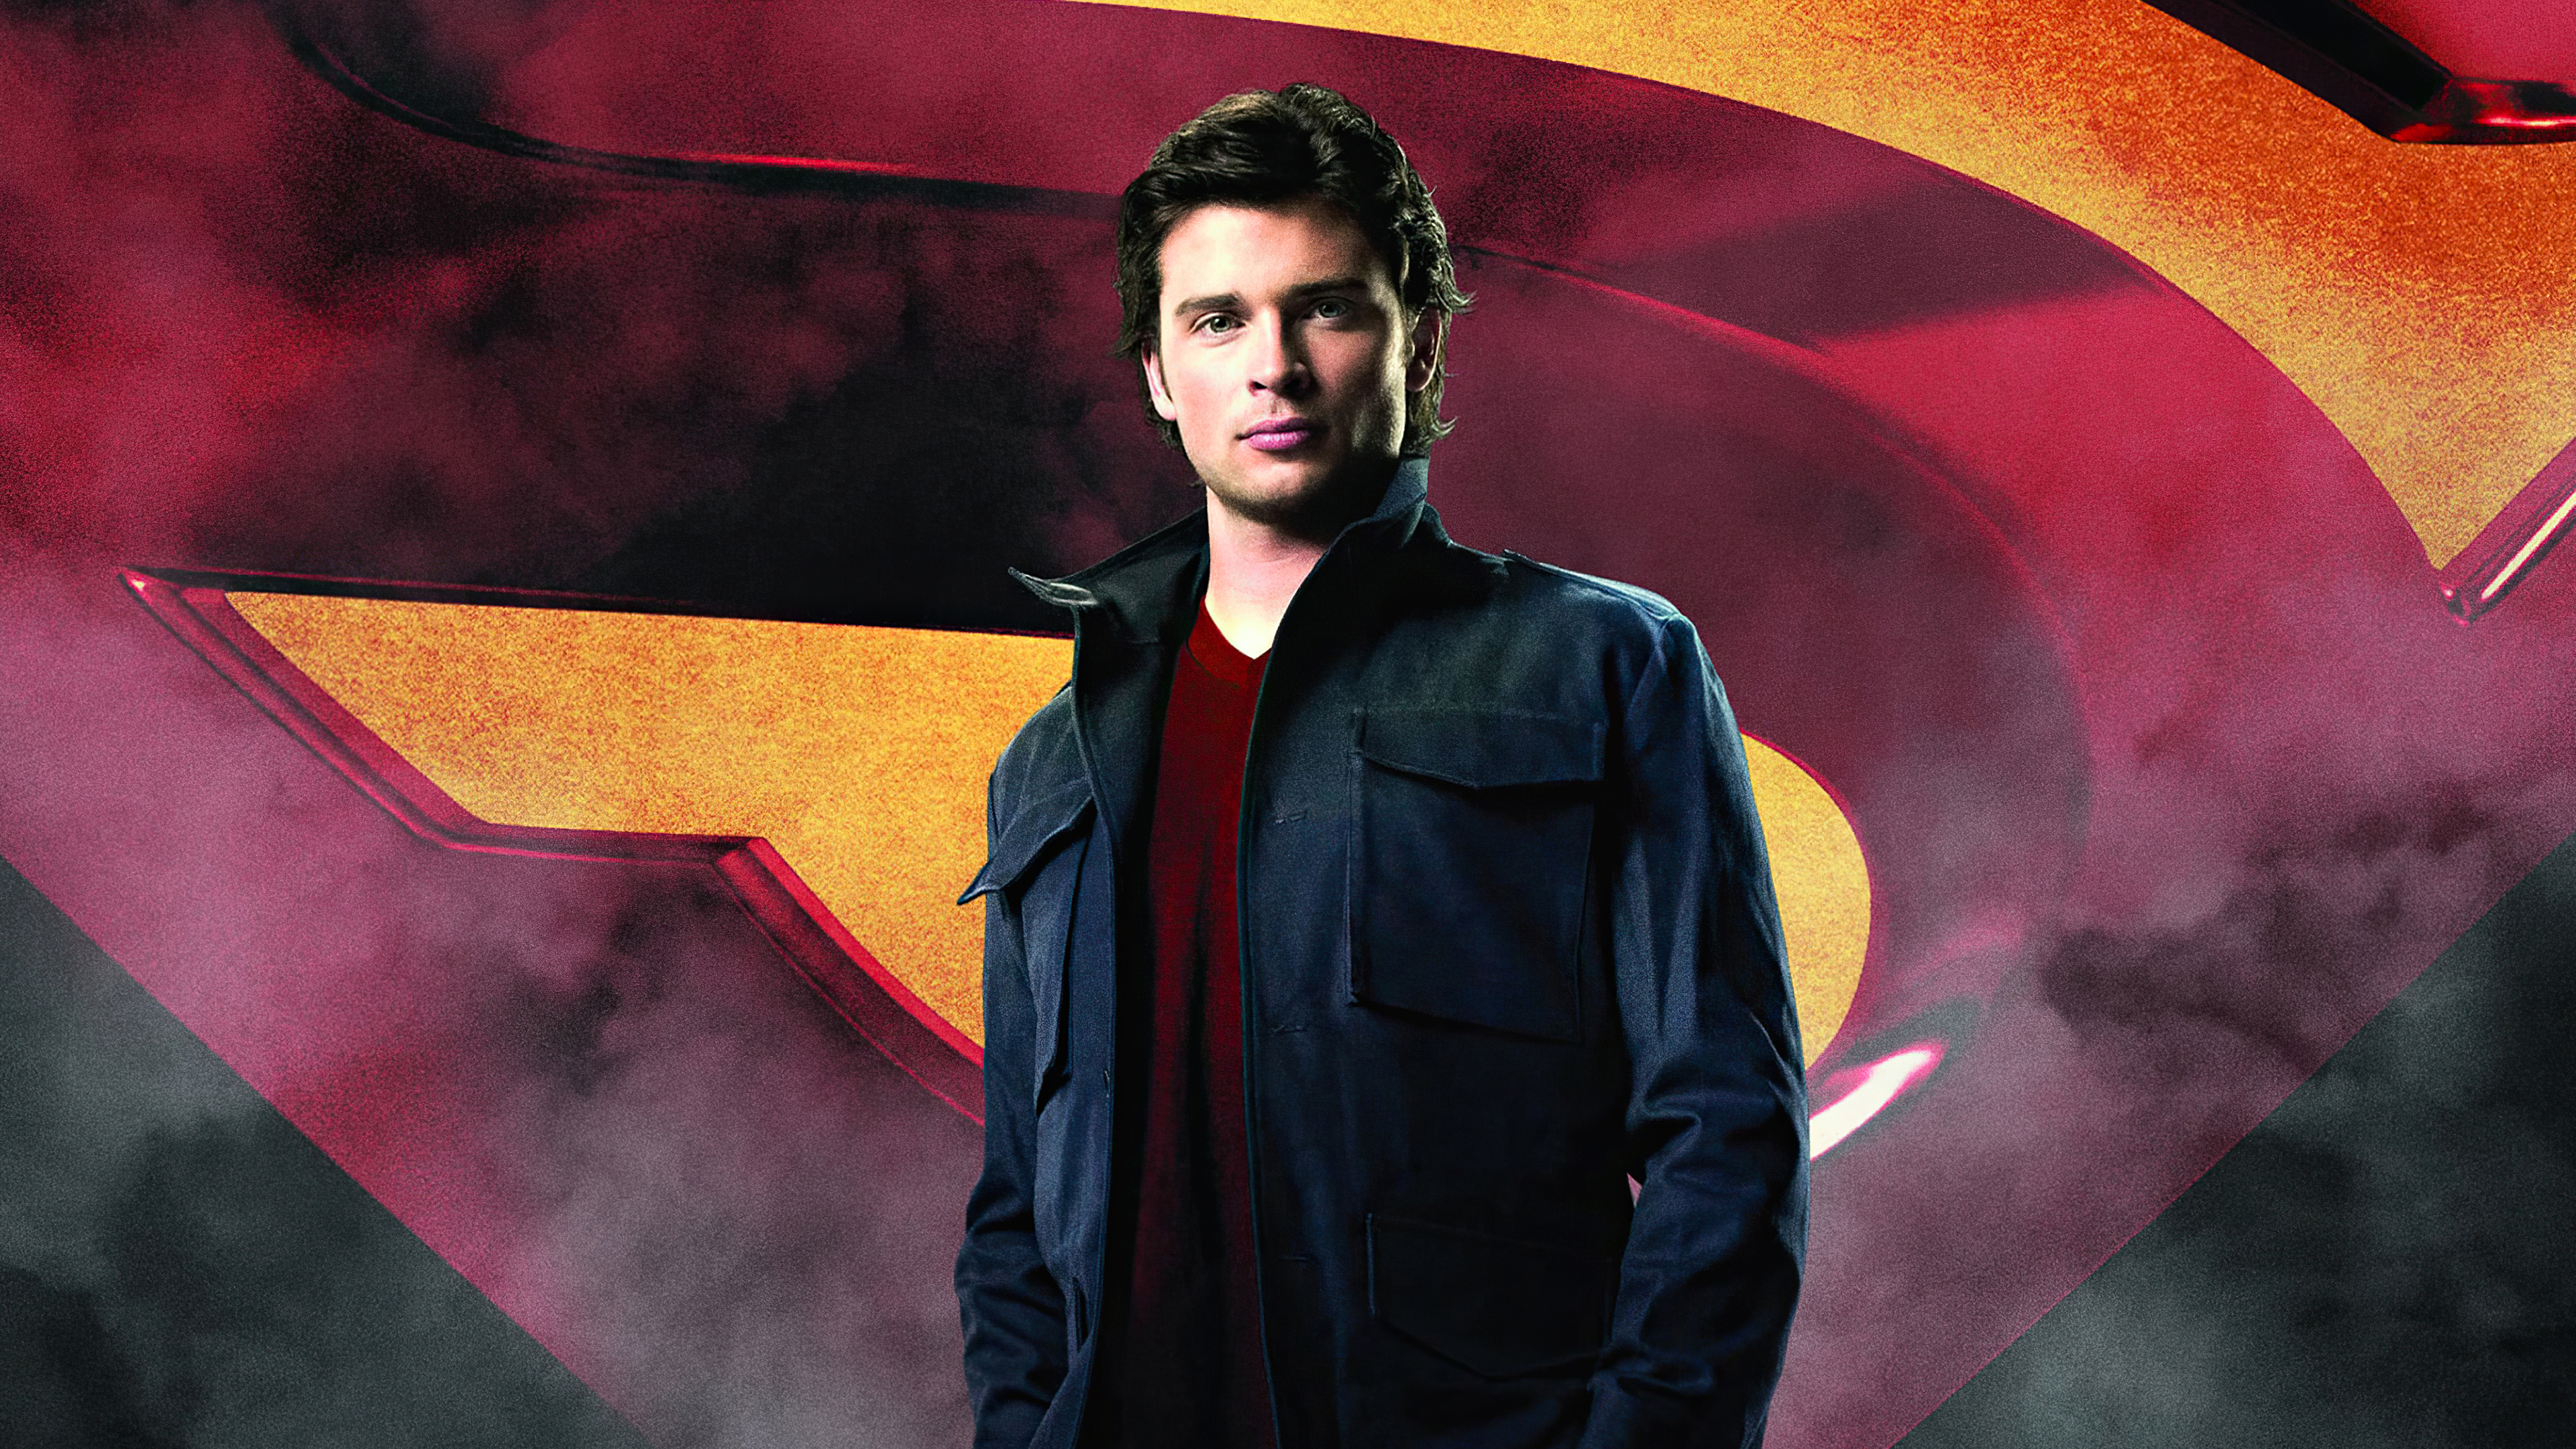 Smallville Wallpapers